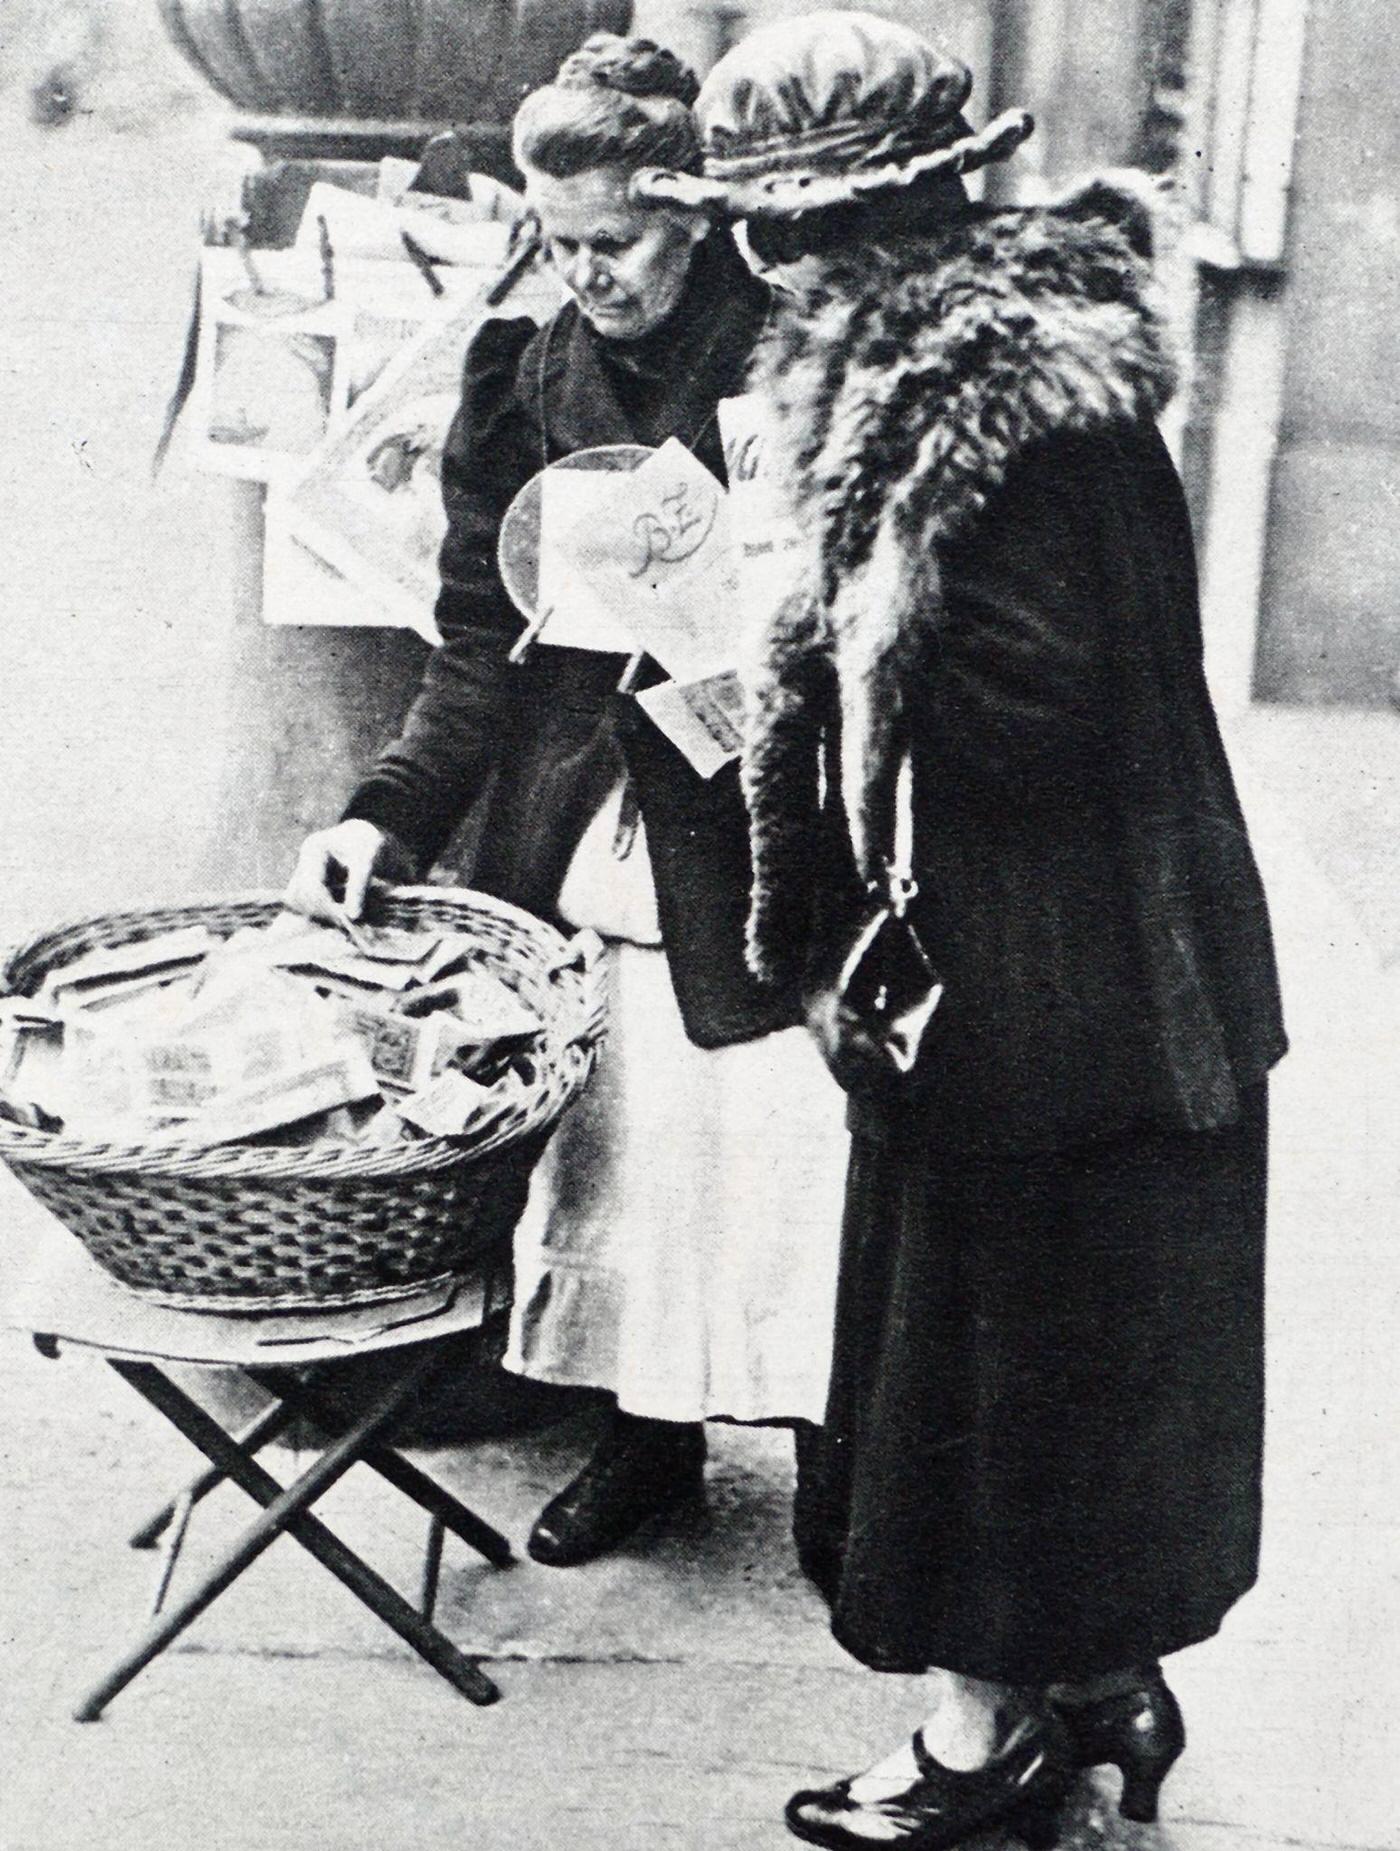 Basket full of banknotes during hyperinflation era in Weimar Germany, 1923.